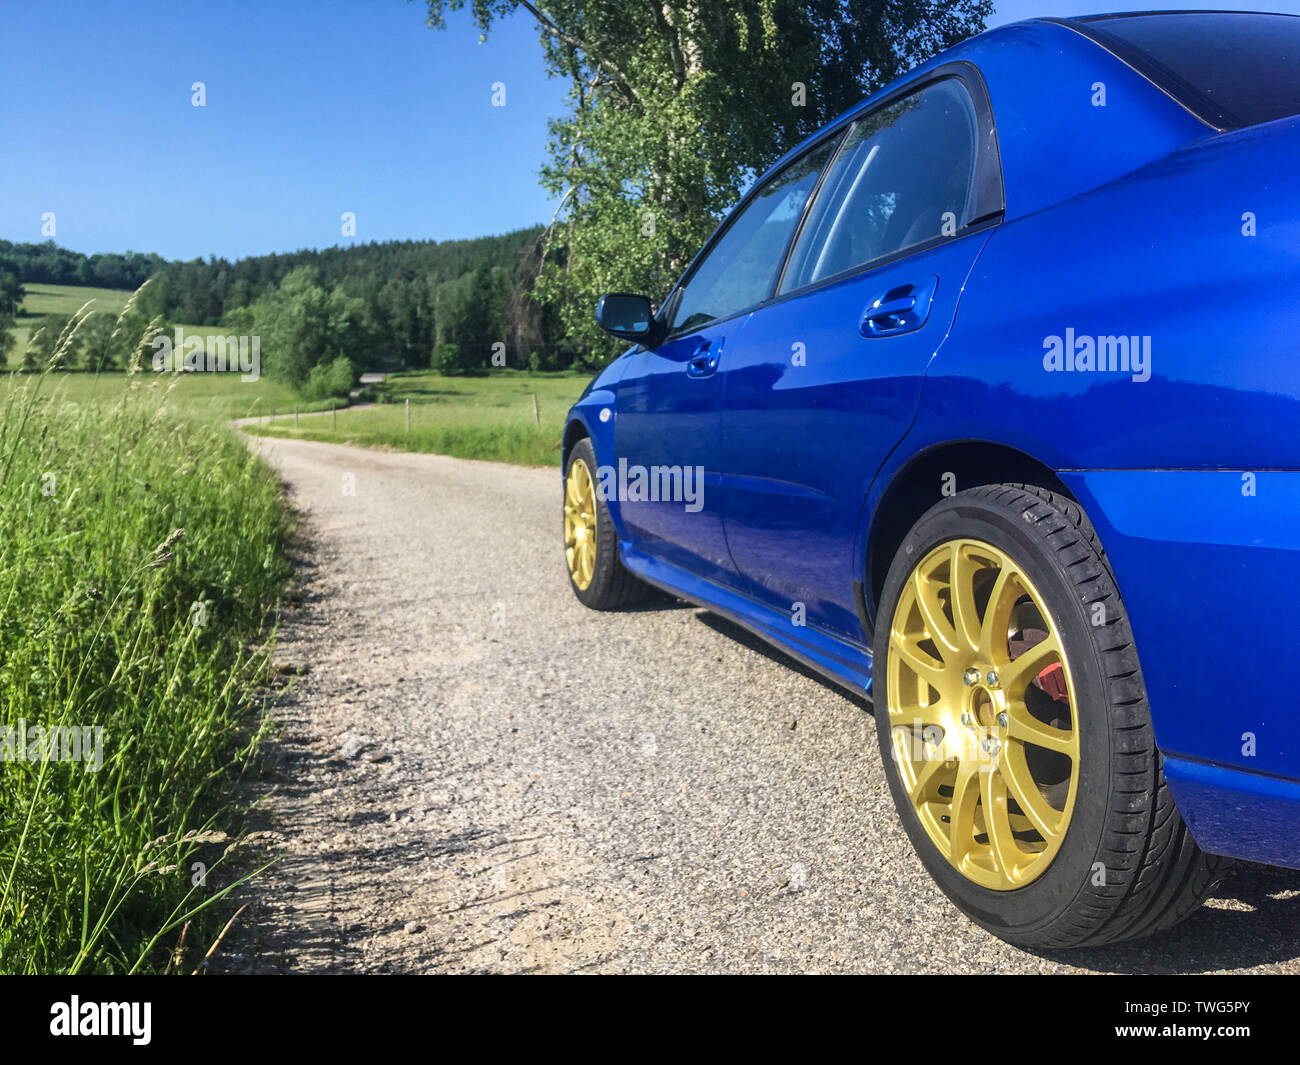 The blue youngtimer sports car with golden rims is standing on the narrow road and is ready to drive fast. Like being part of the rally. Stock Photo